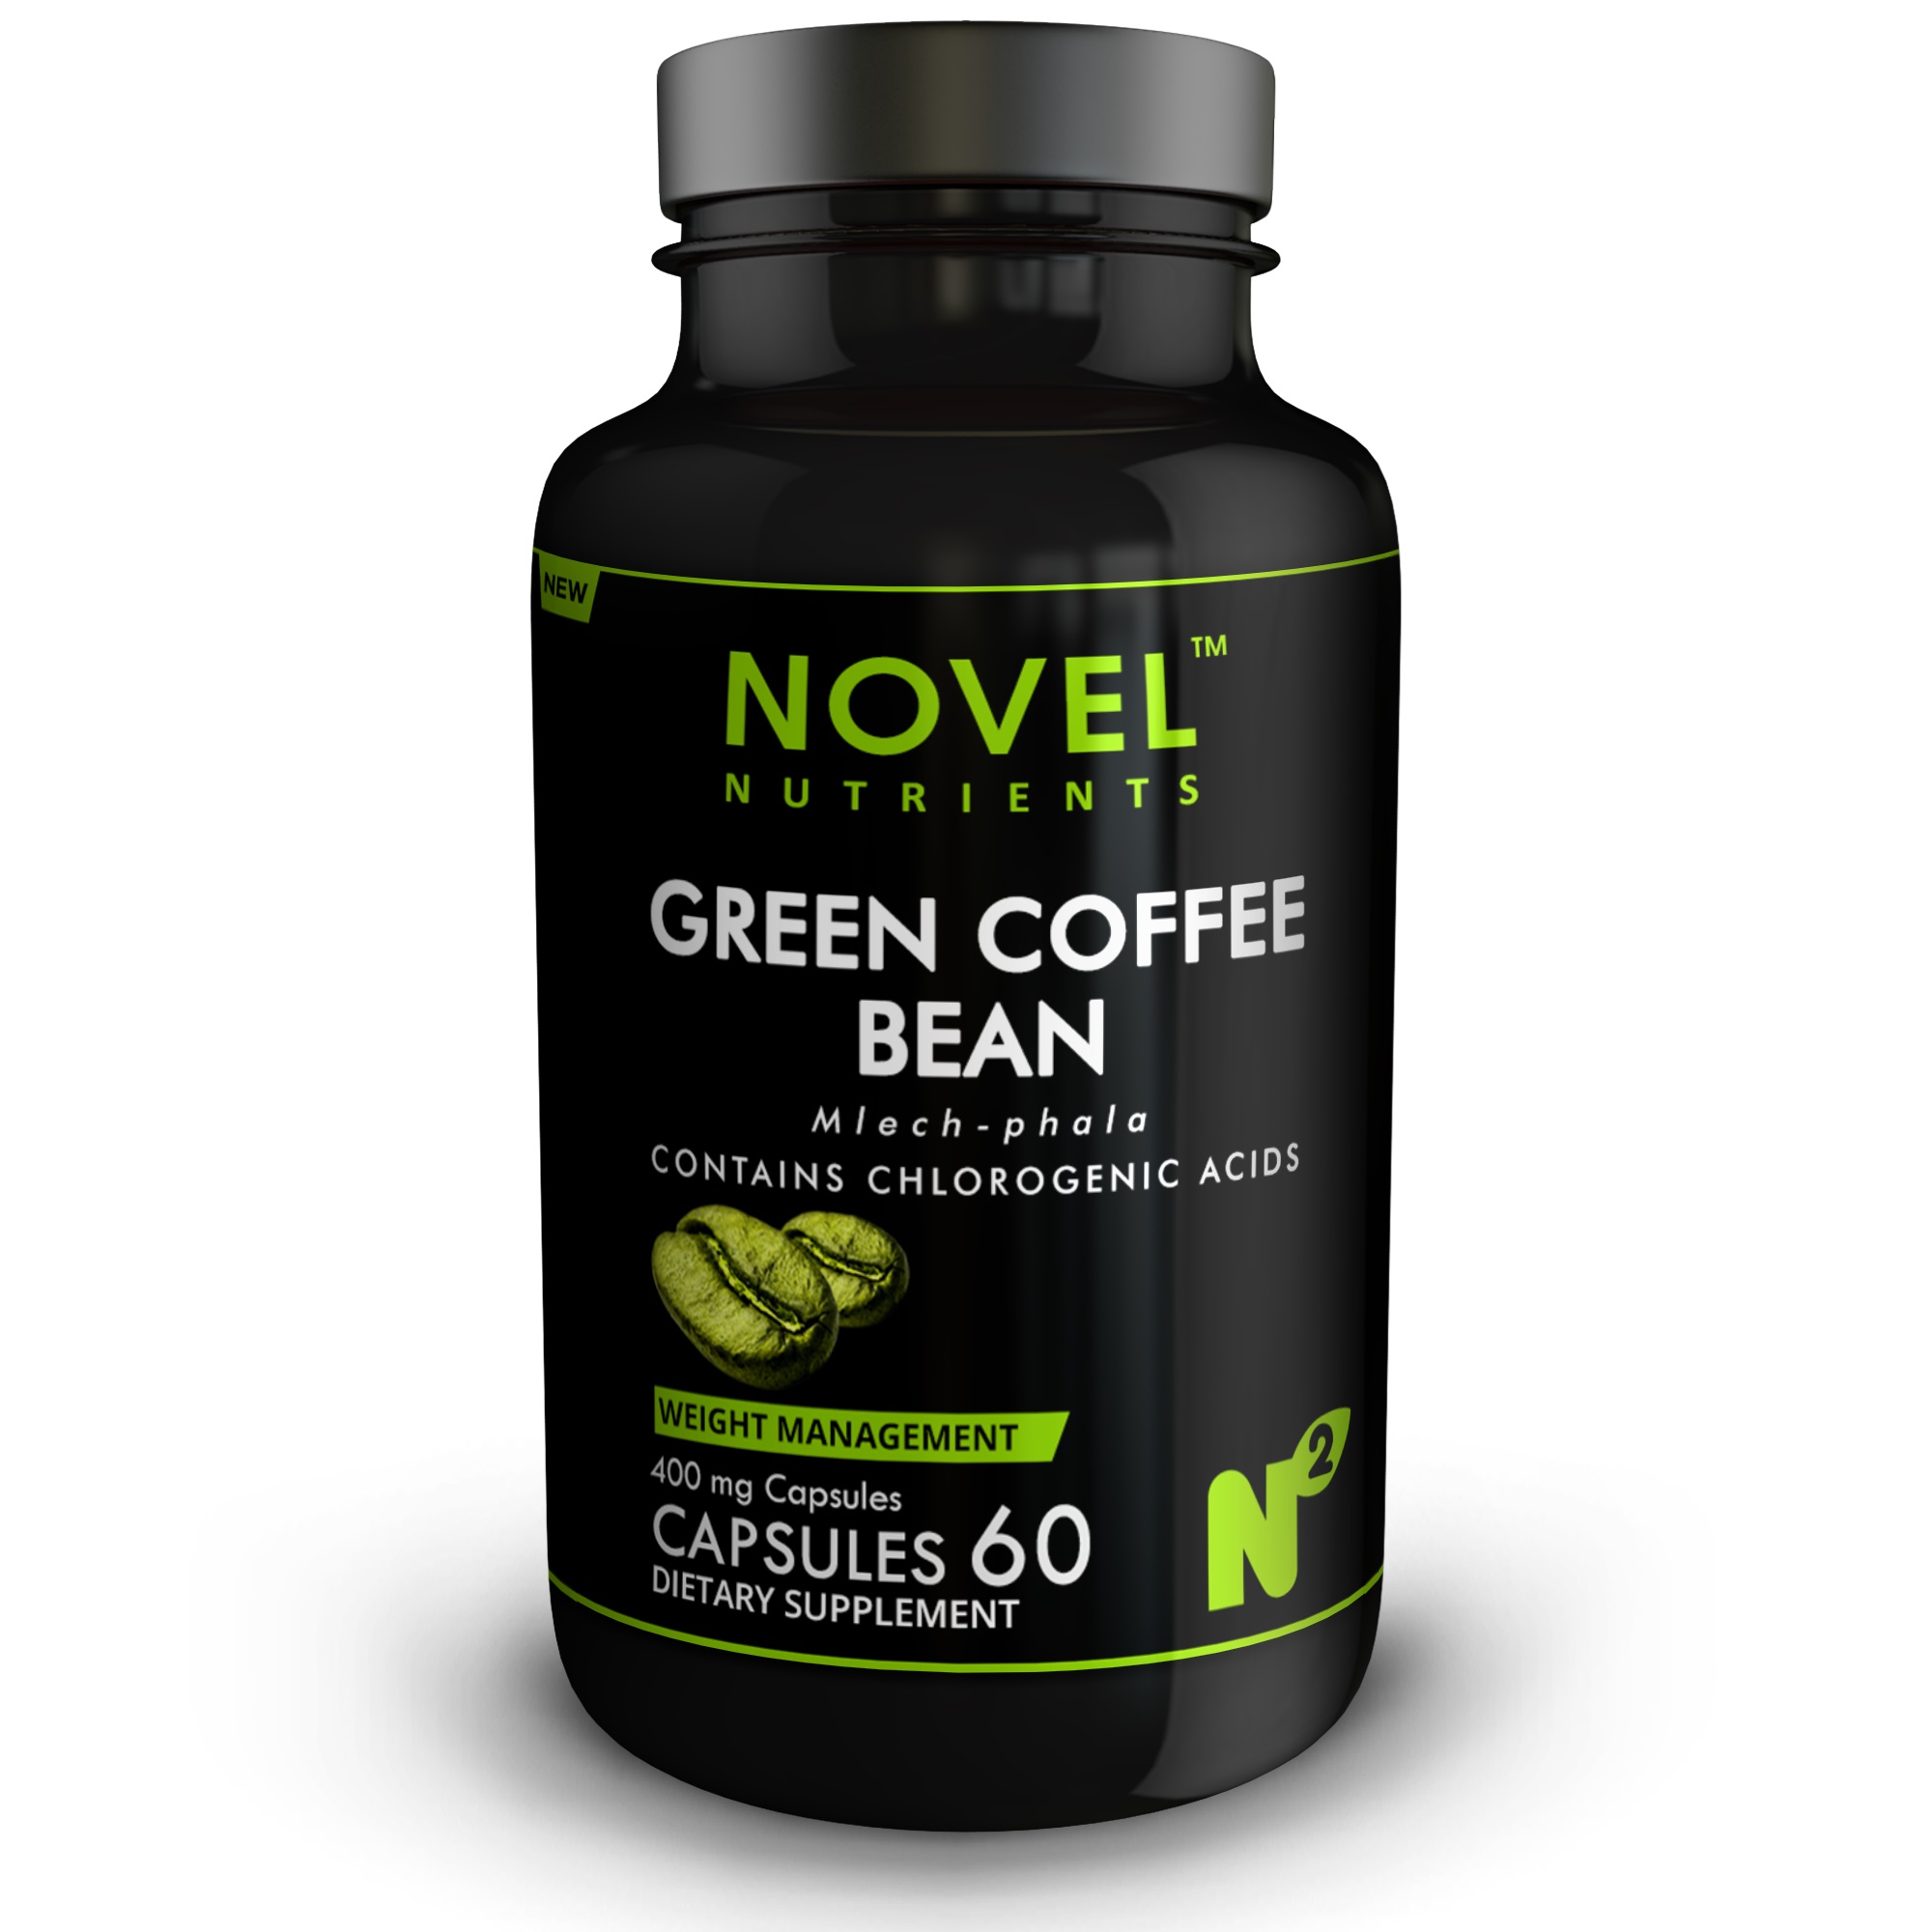 GREEN COFFEE BEAN 500 mg 60 Capsules - Weight Management